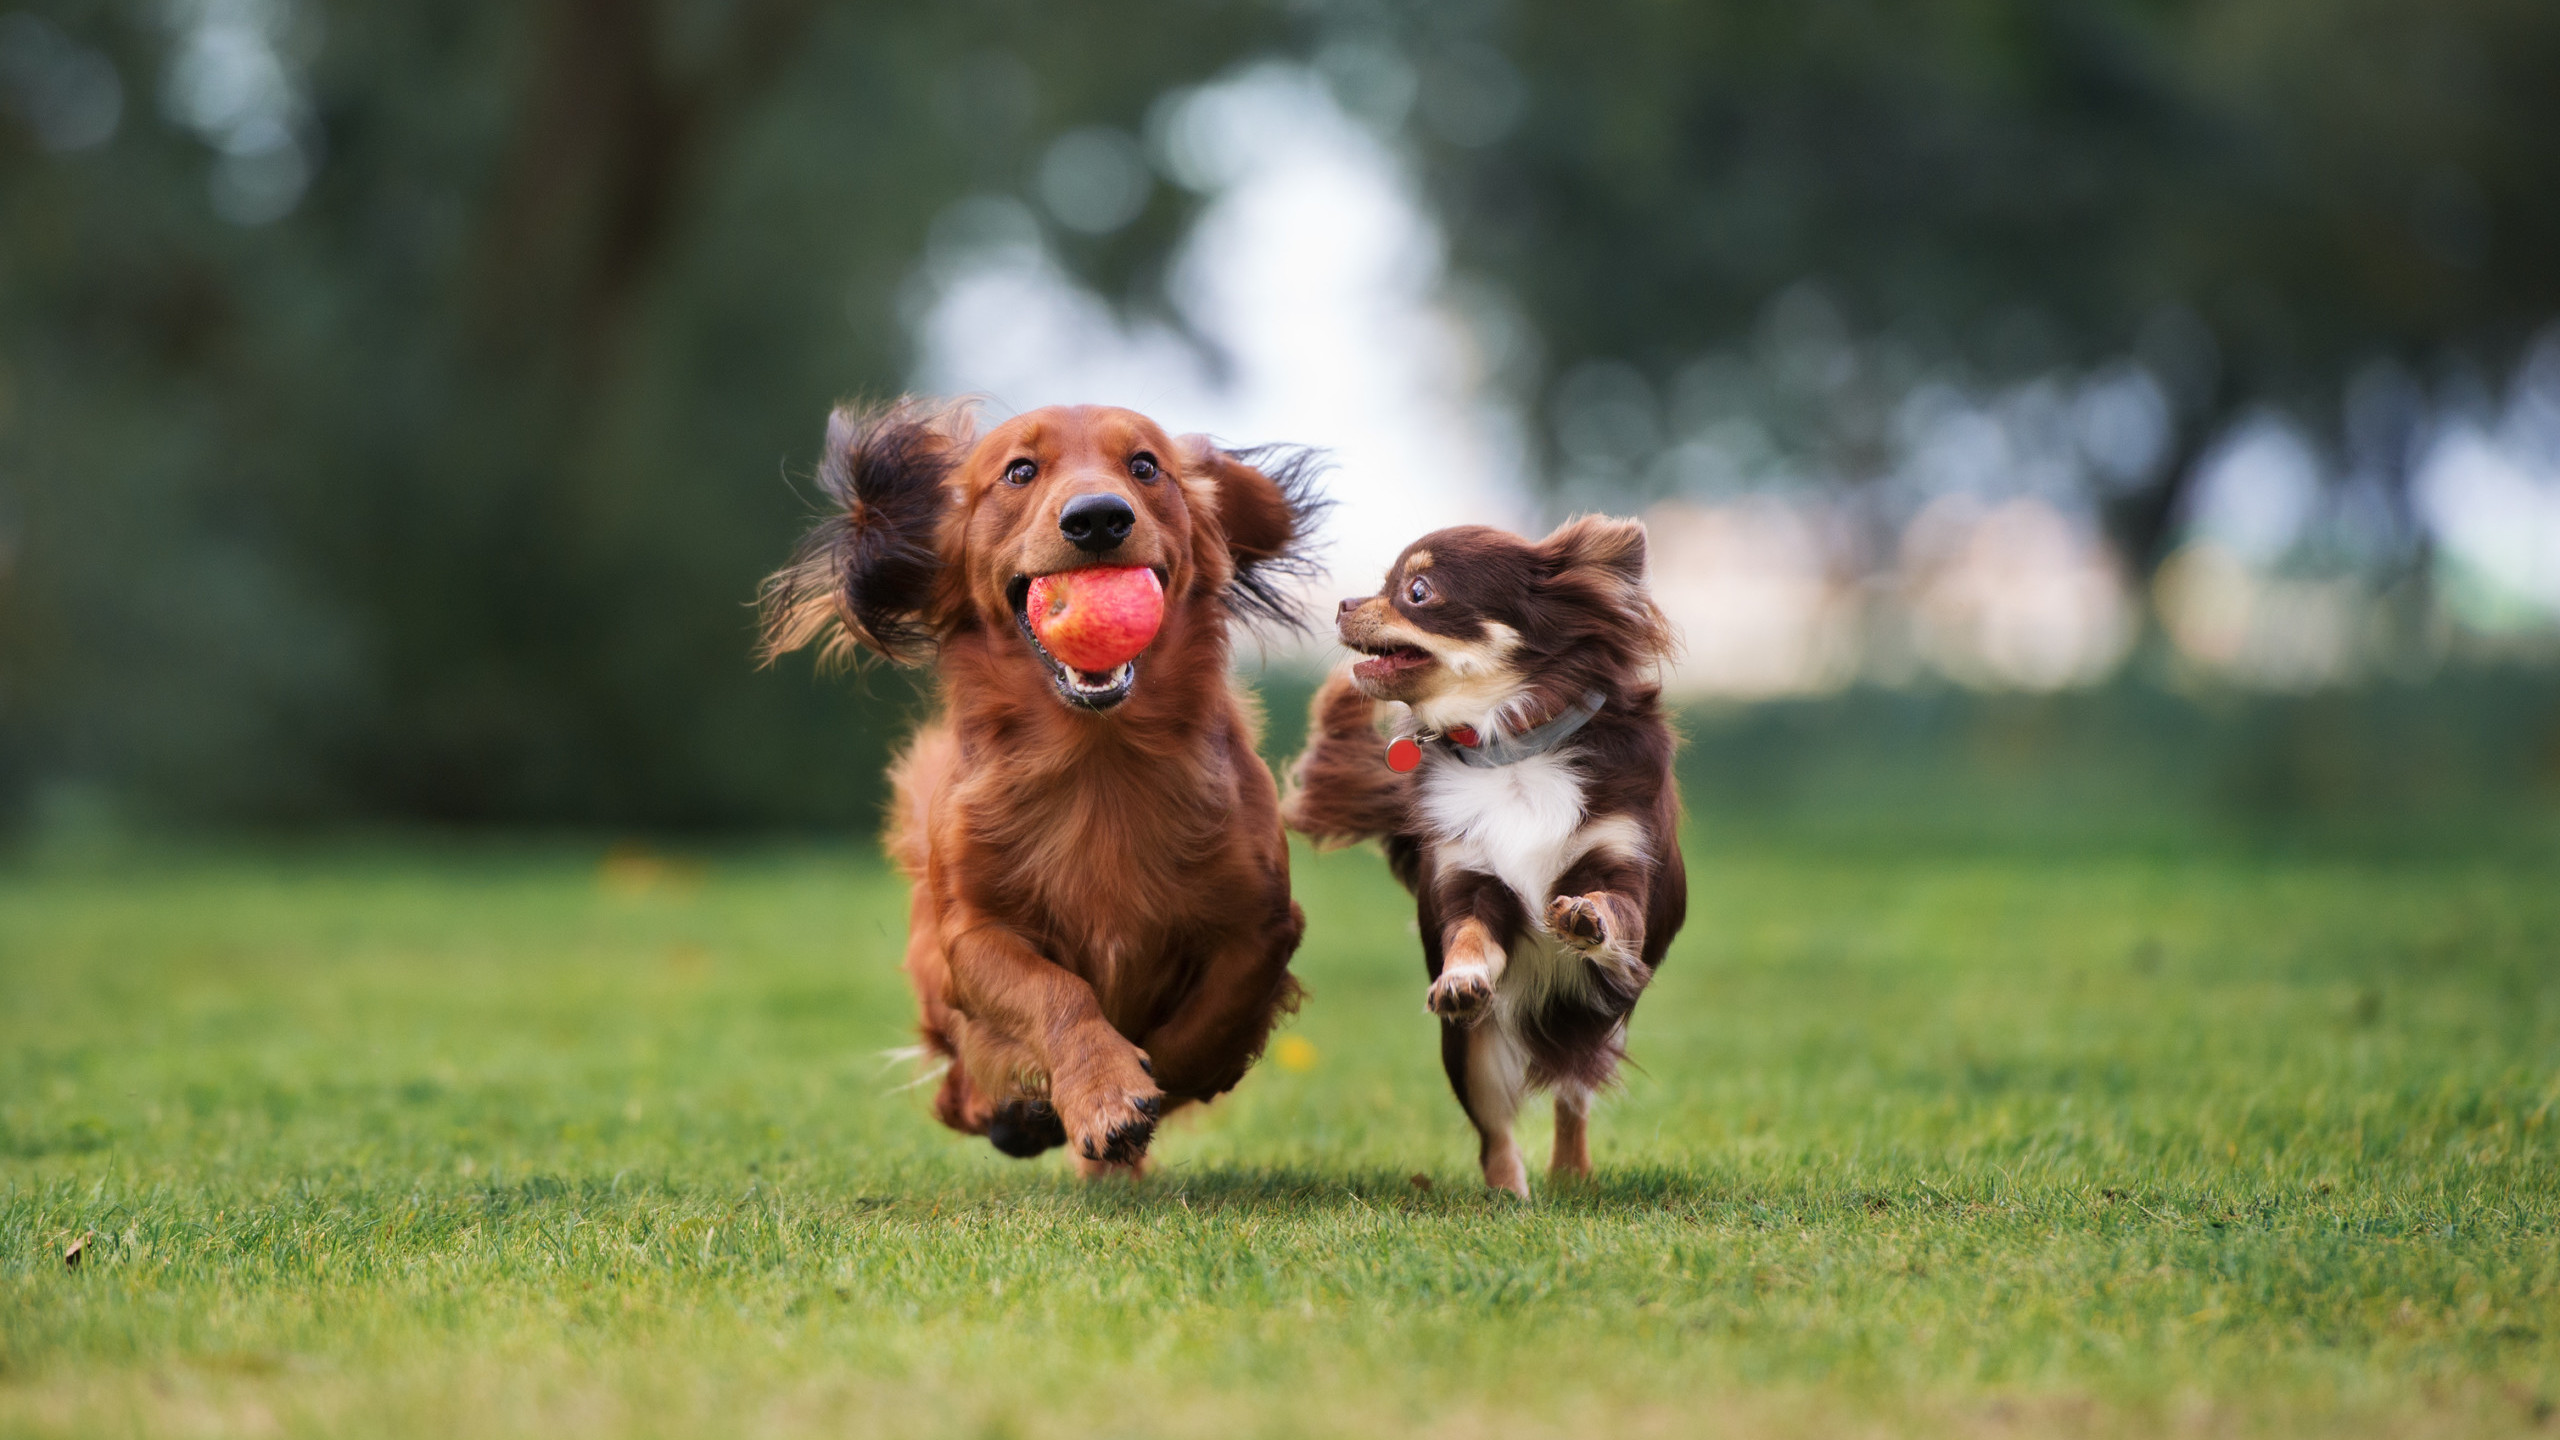 Dachshund with red apple in mouth and chihuahua running on green grass